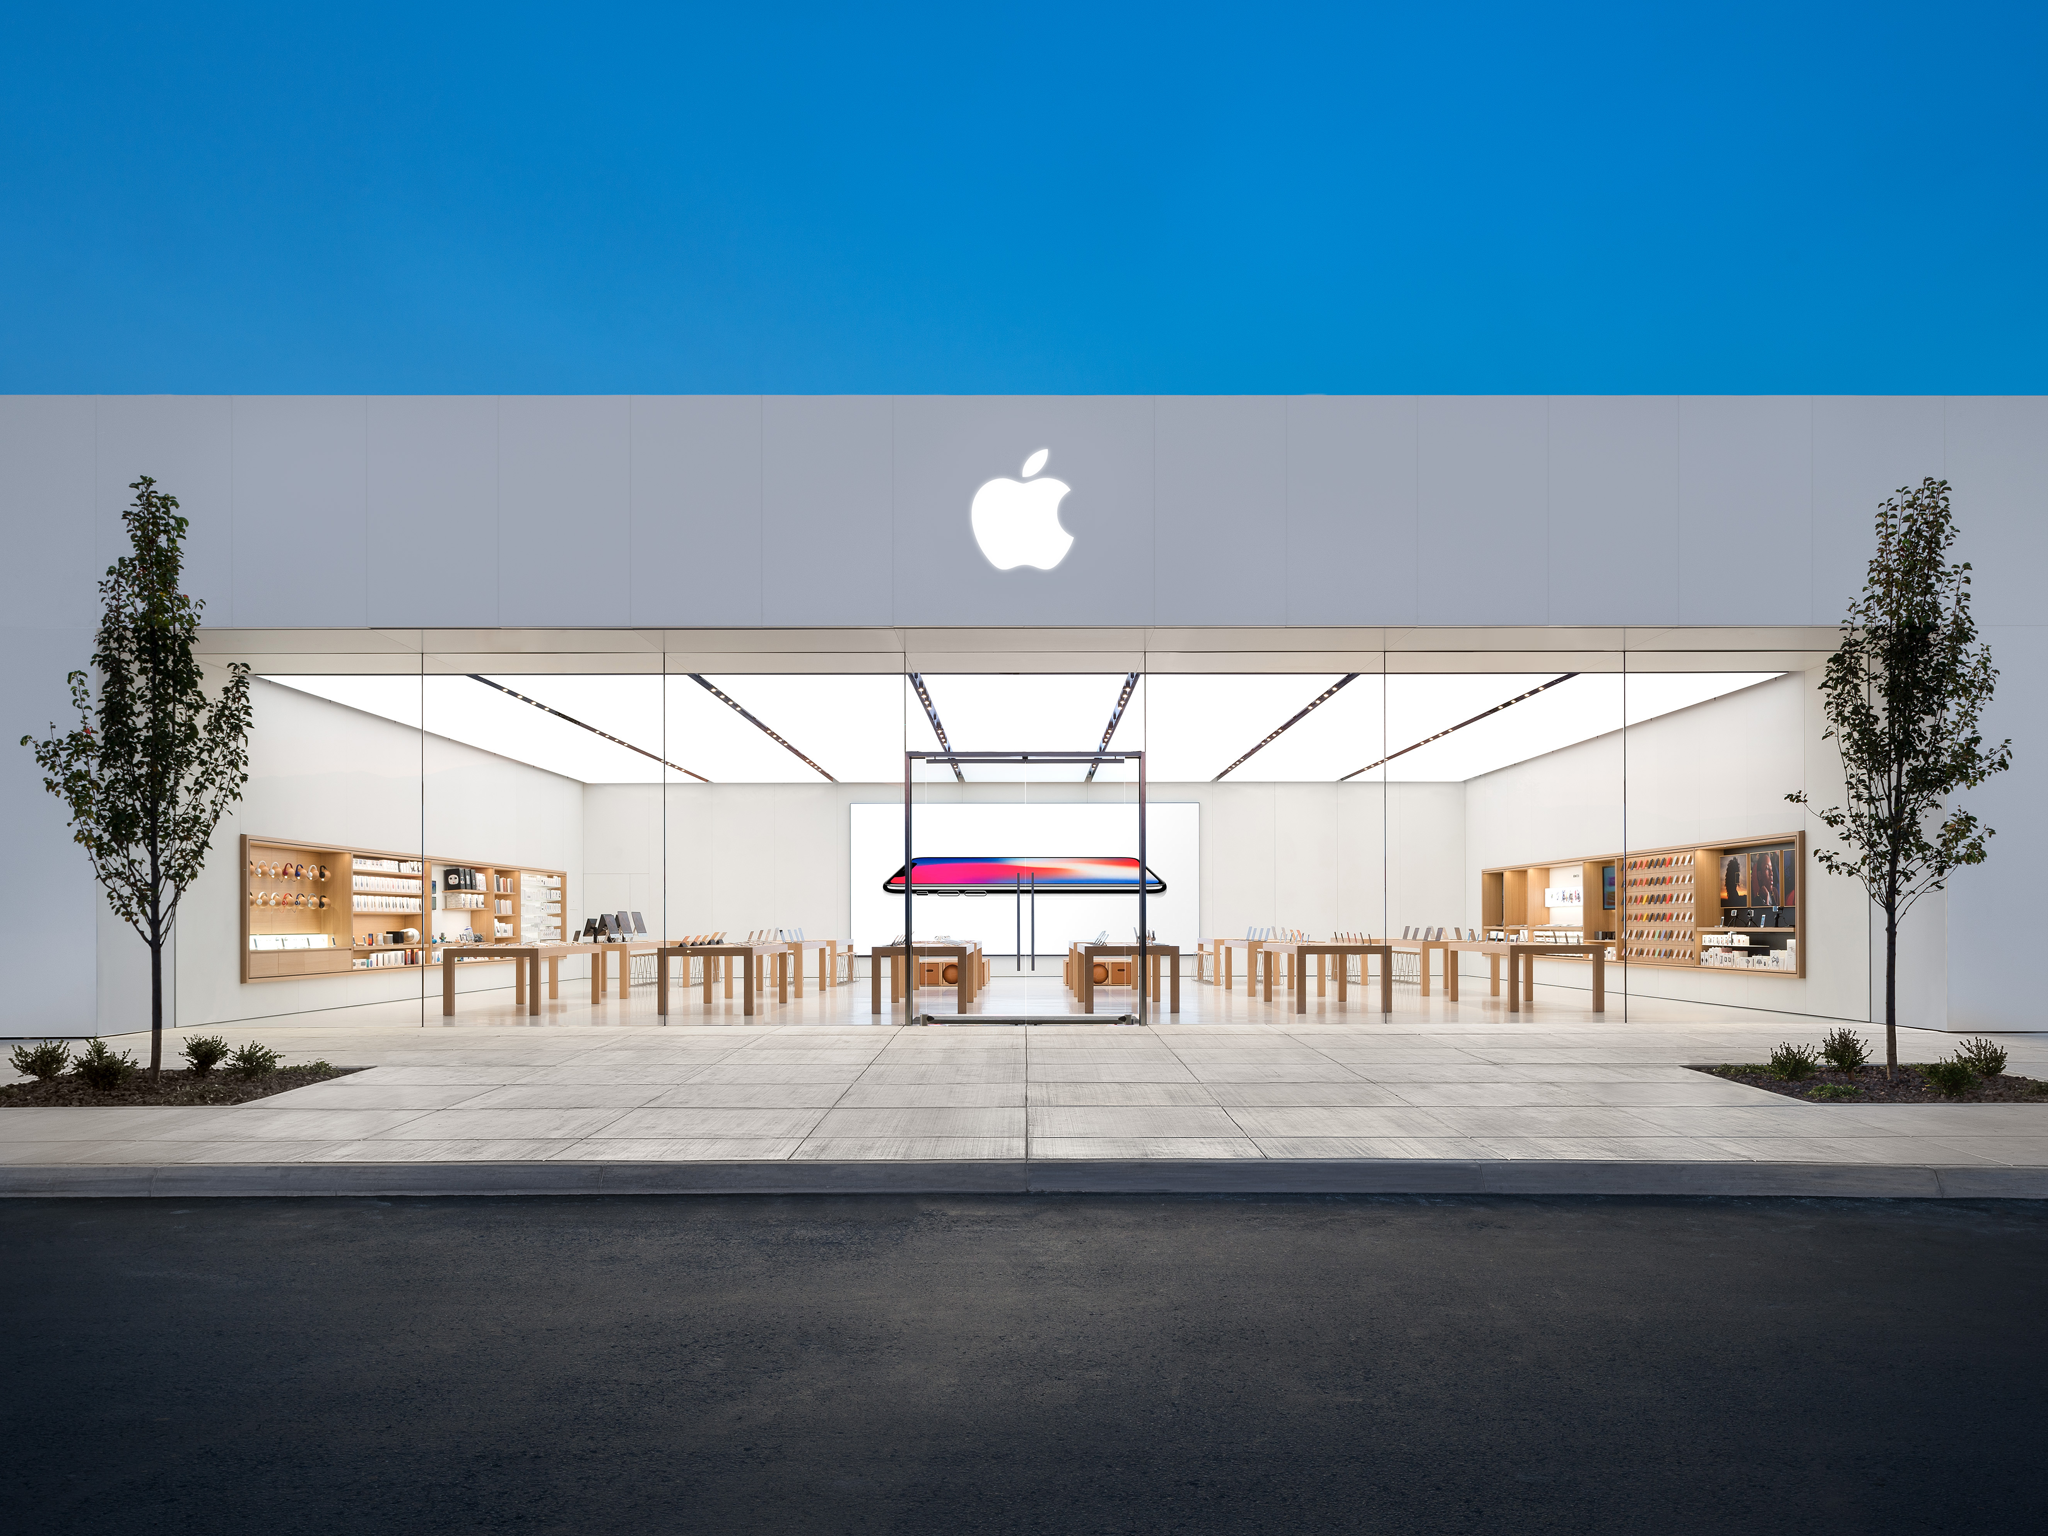 apple store reno make an appointment